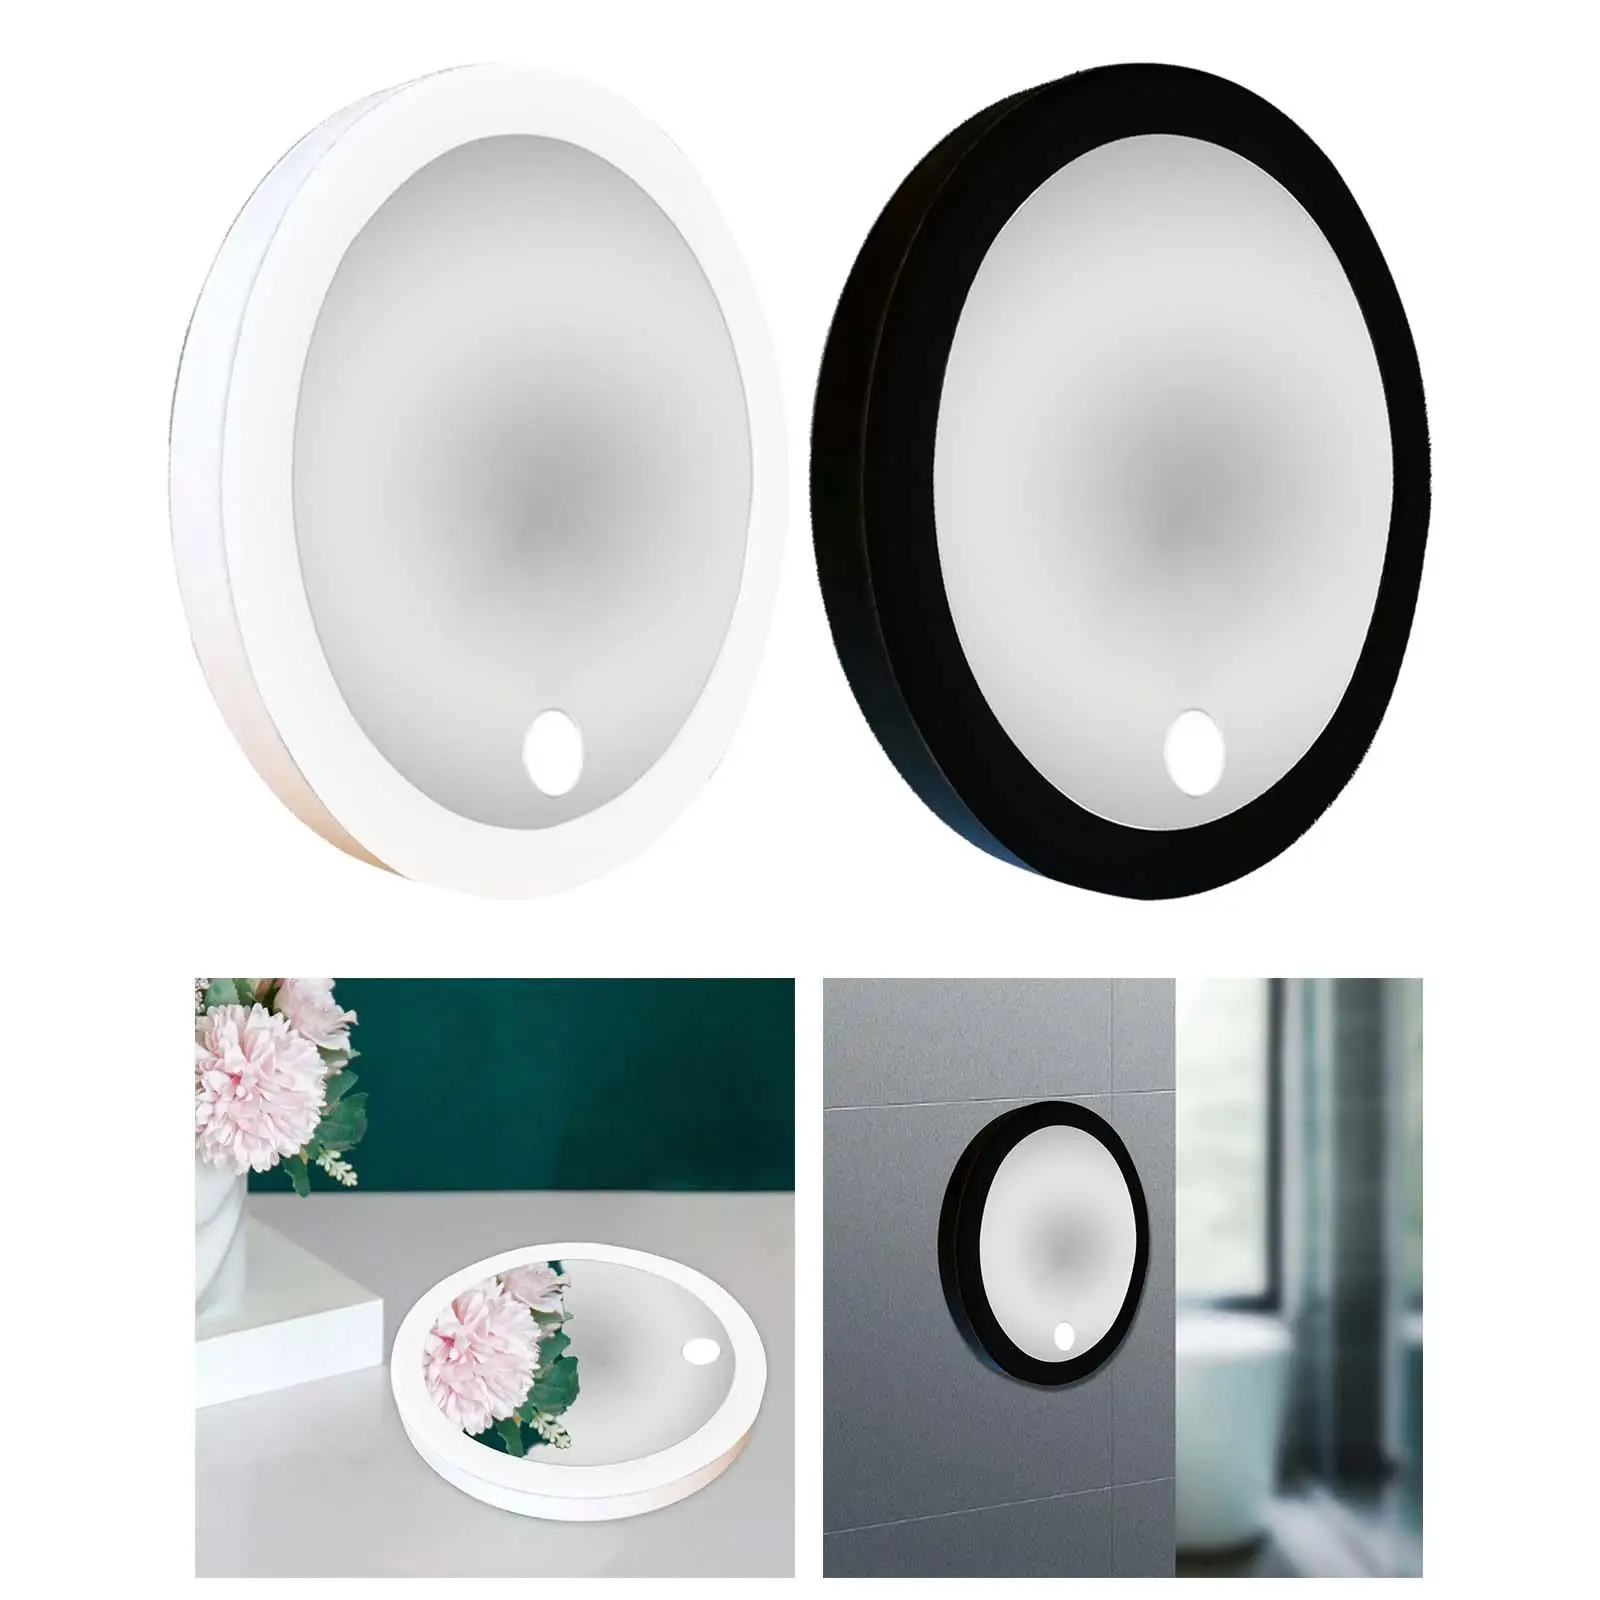 10x Magnifying Suction Mirror Portable Magnifying Mirror with Lamp Compact Easy Mounting Touch Screen Wall LED Makeup Mirror